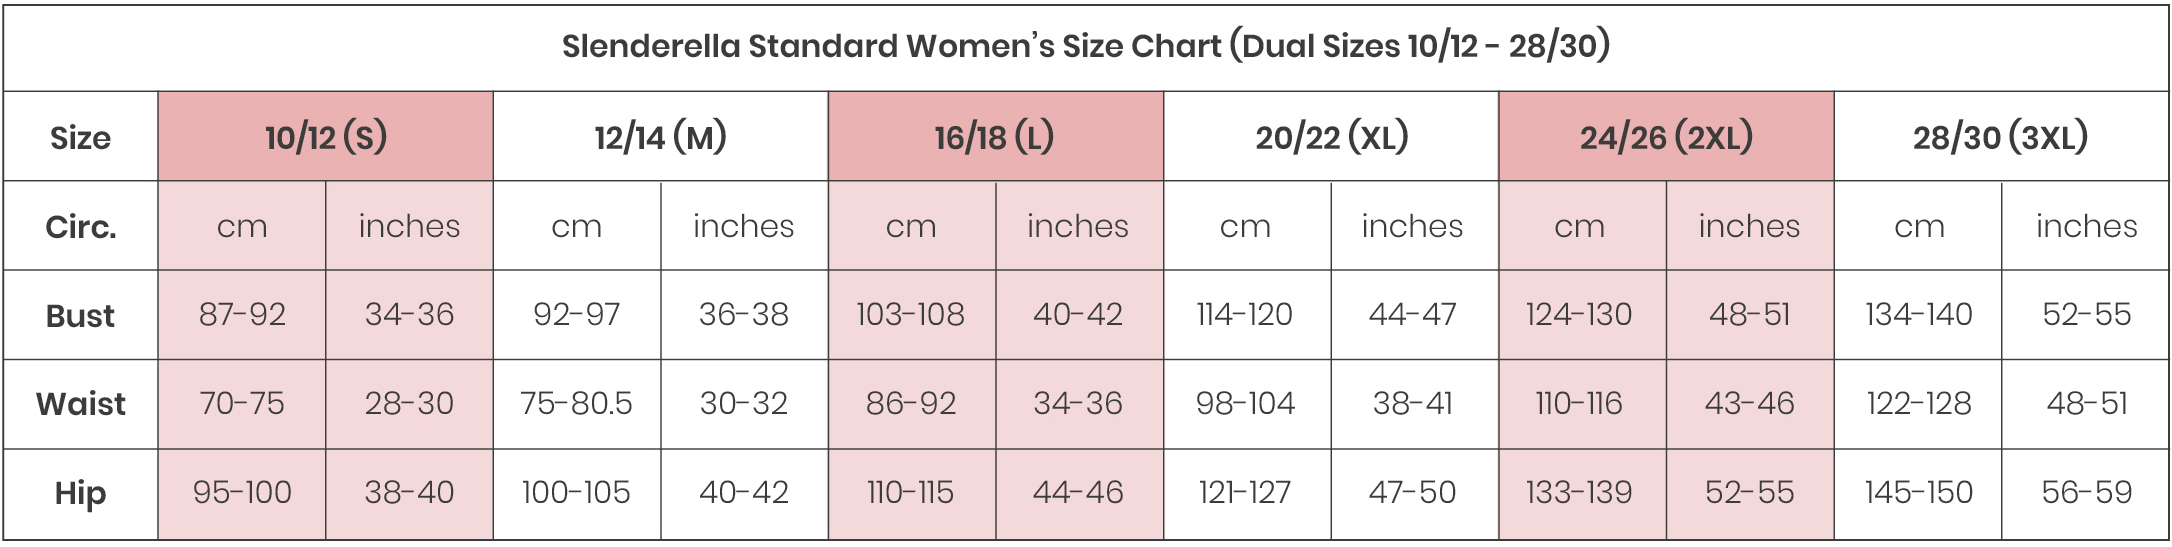 Bra Size Calculator: Accurate for All Sizes